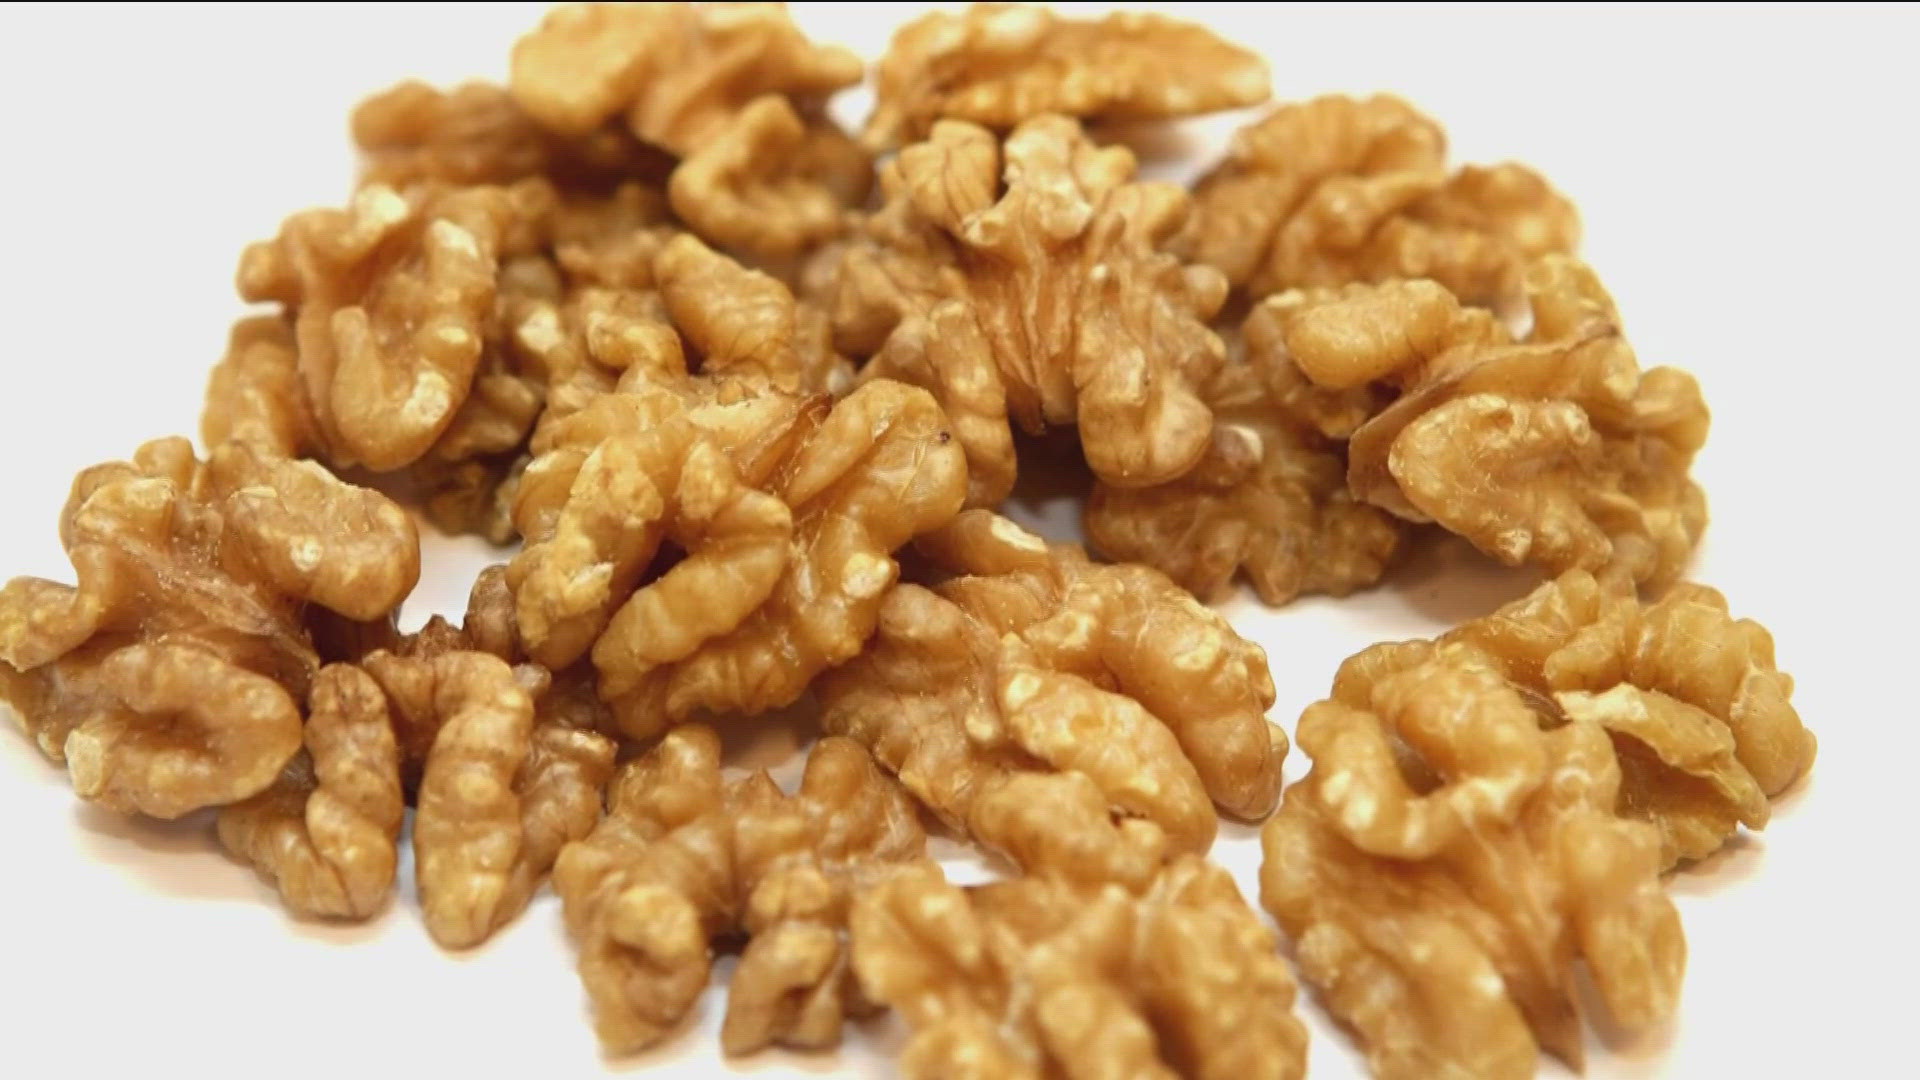 A recall has been issued for walnuts sold in 19 U.S. states. Watch the video to learn more.